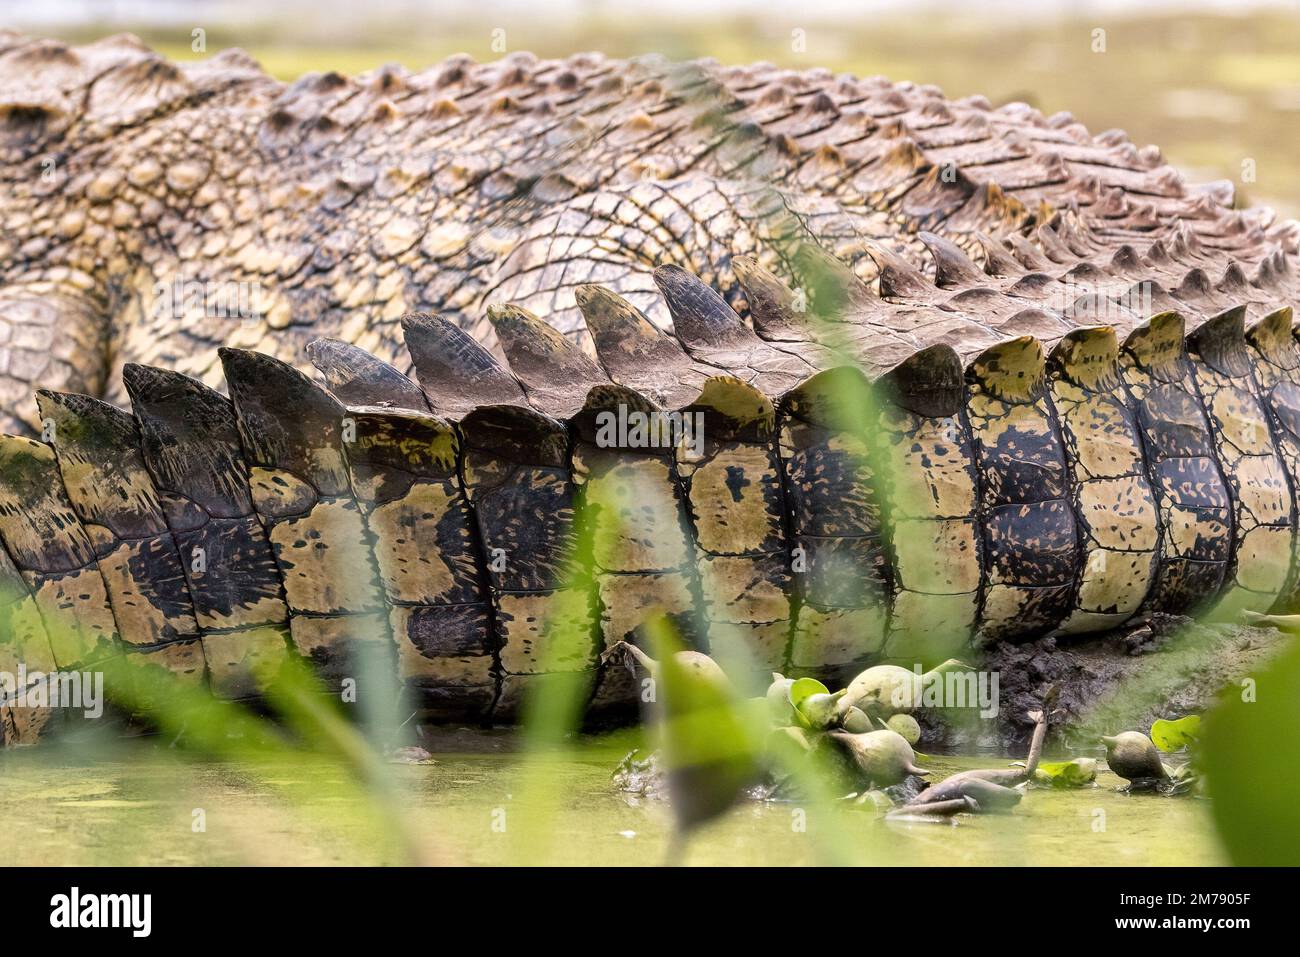 The detail of the tail of a nile crocodile, Crocodylus niloticus, well camouflaged on the banks of Lake Edward, Queen Elizabeth National Park, Uganda. Stock Photo